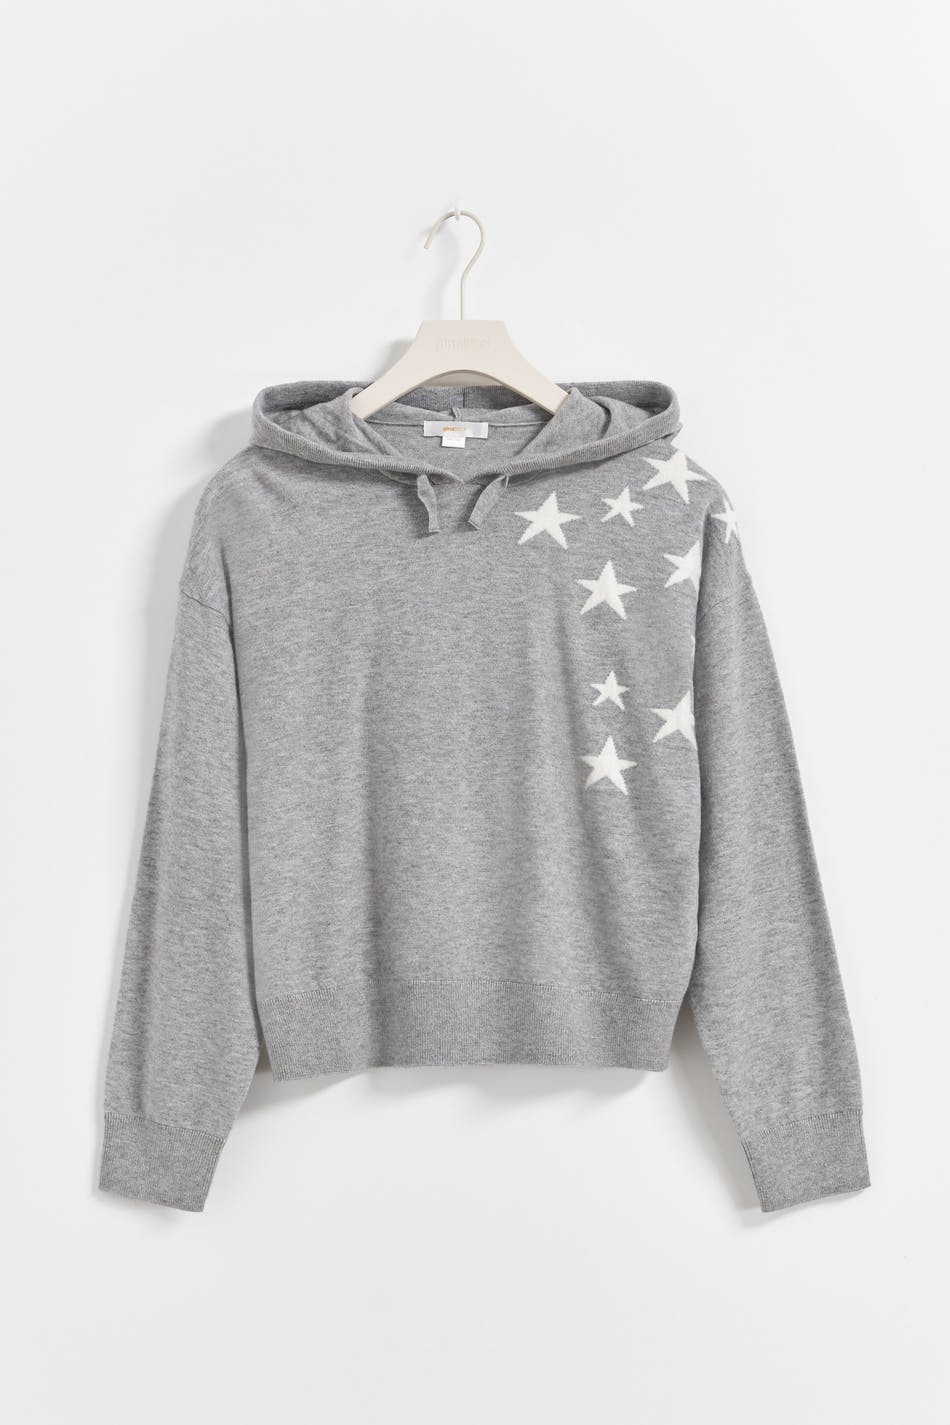 Gina Tricot - Y star knitted hoodie - young-tops - Grey - 134/140 - Female